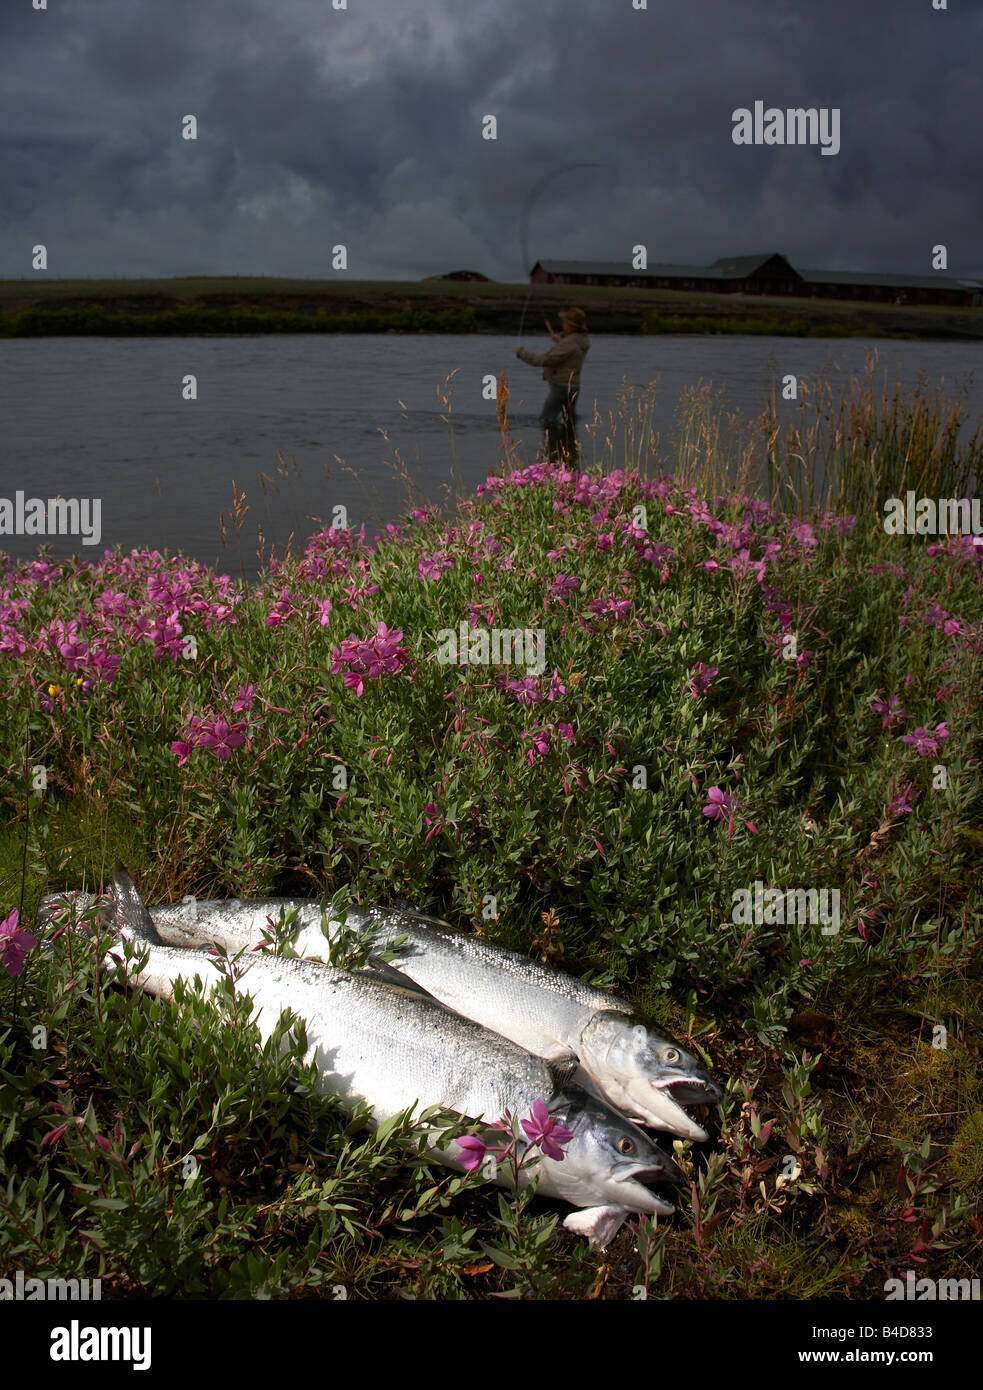 Fishermen cathing salmon in a river by Hotel Ranga, Iceland Stock Photo